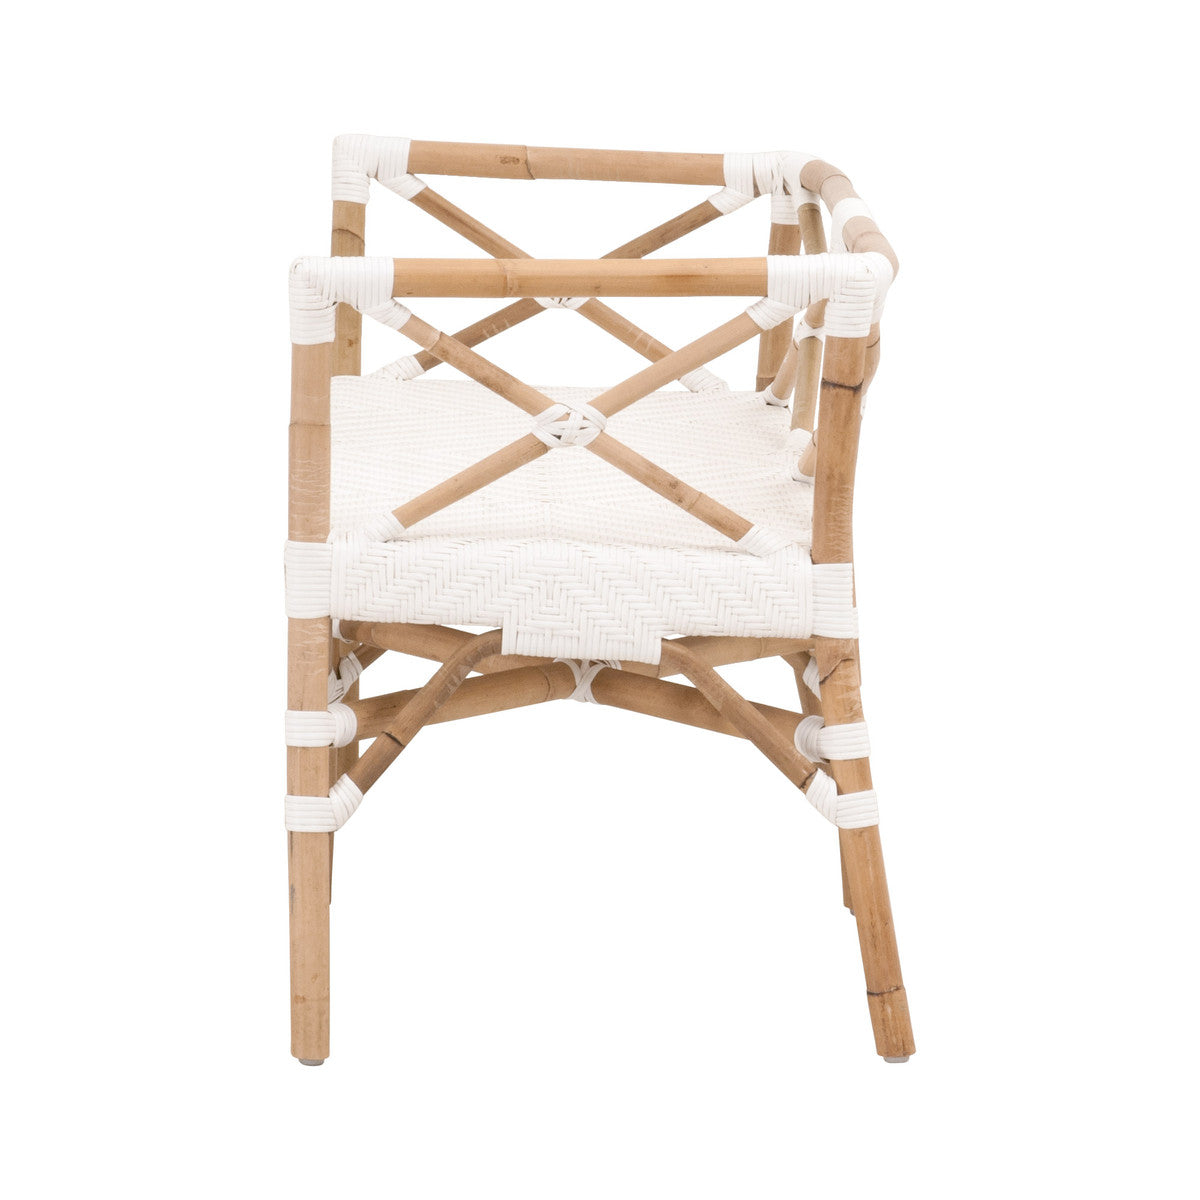 Palisades Bench in White Synthetic Binding, Natural Rattan - 4120.WHT/NAT